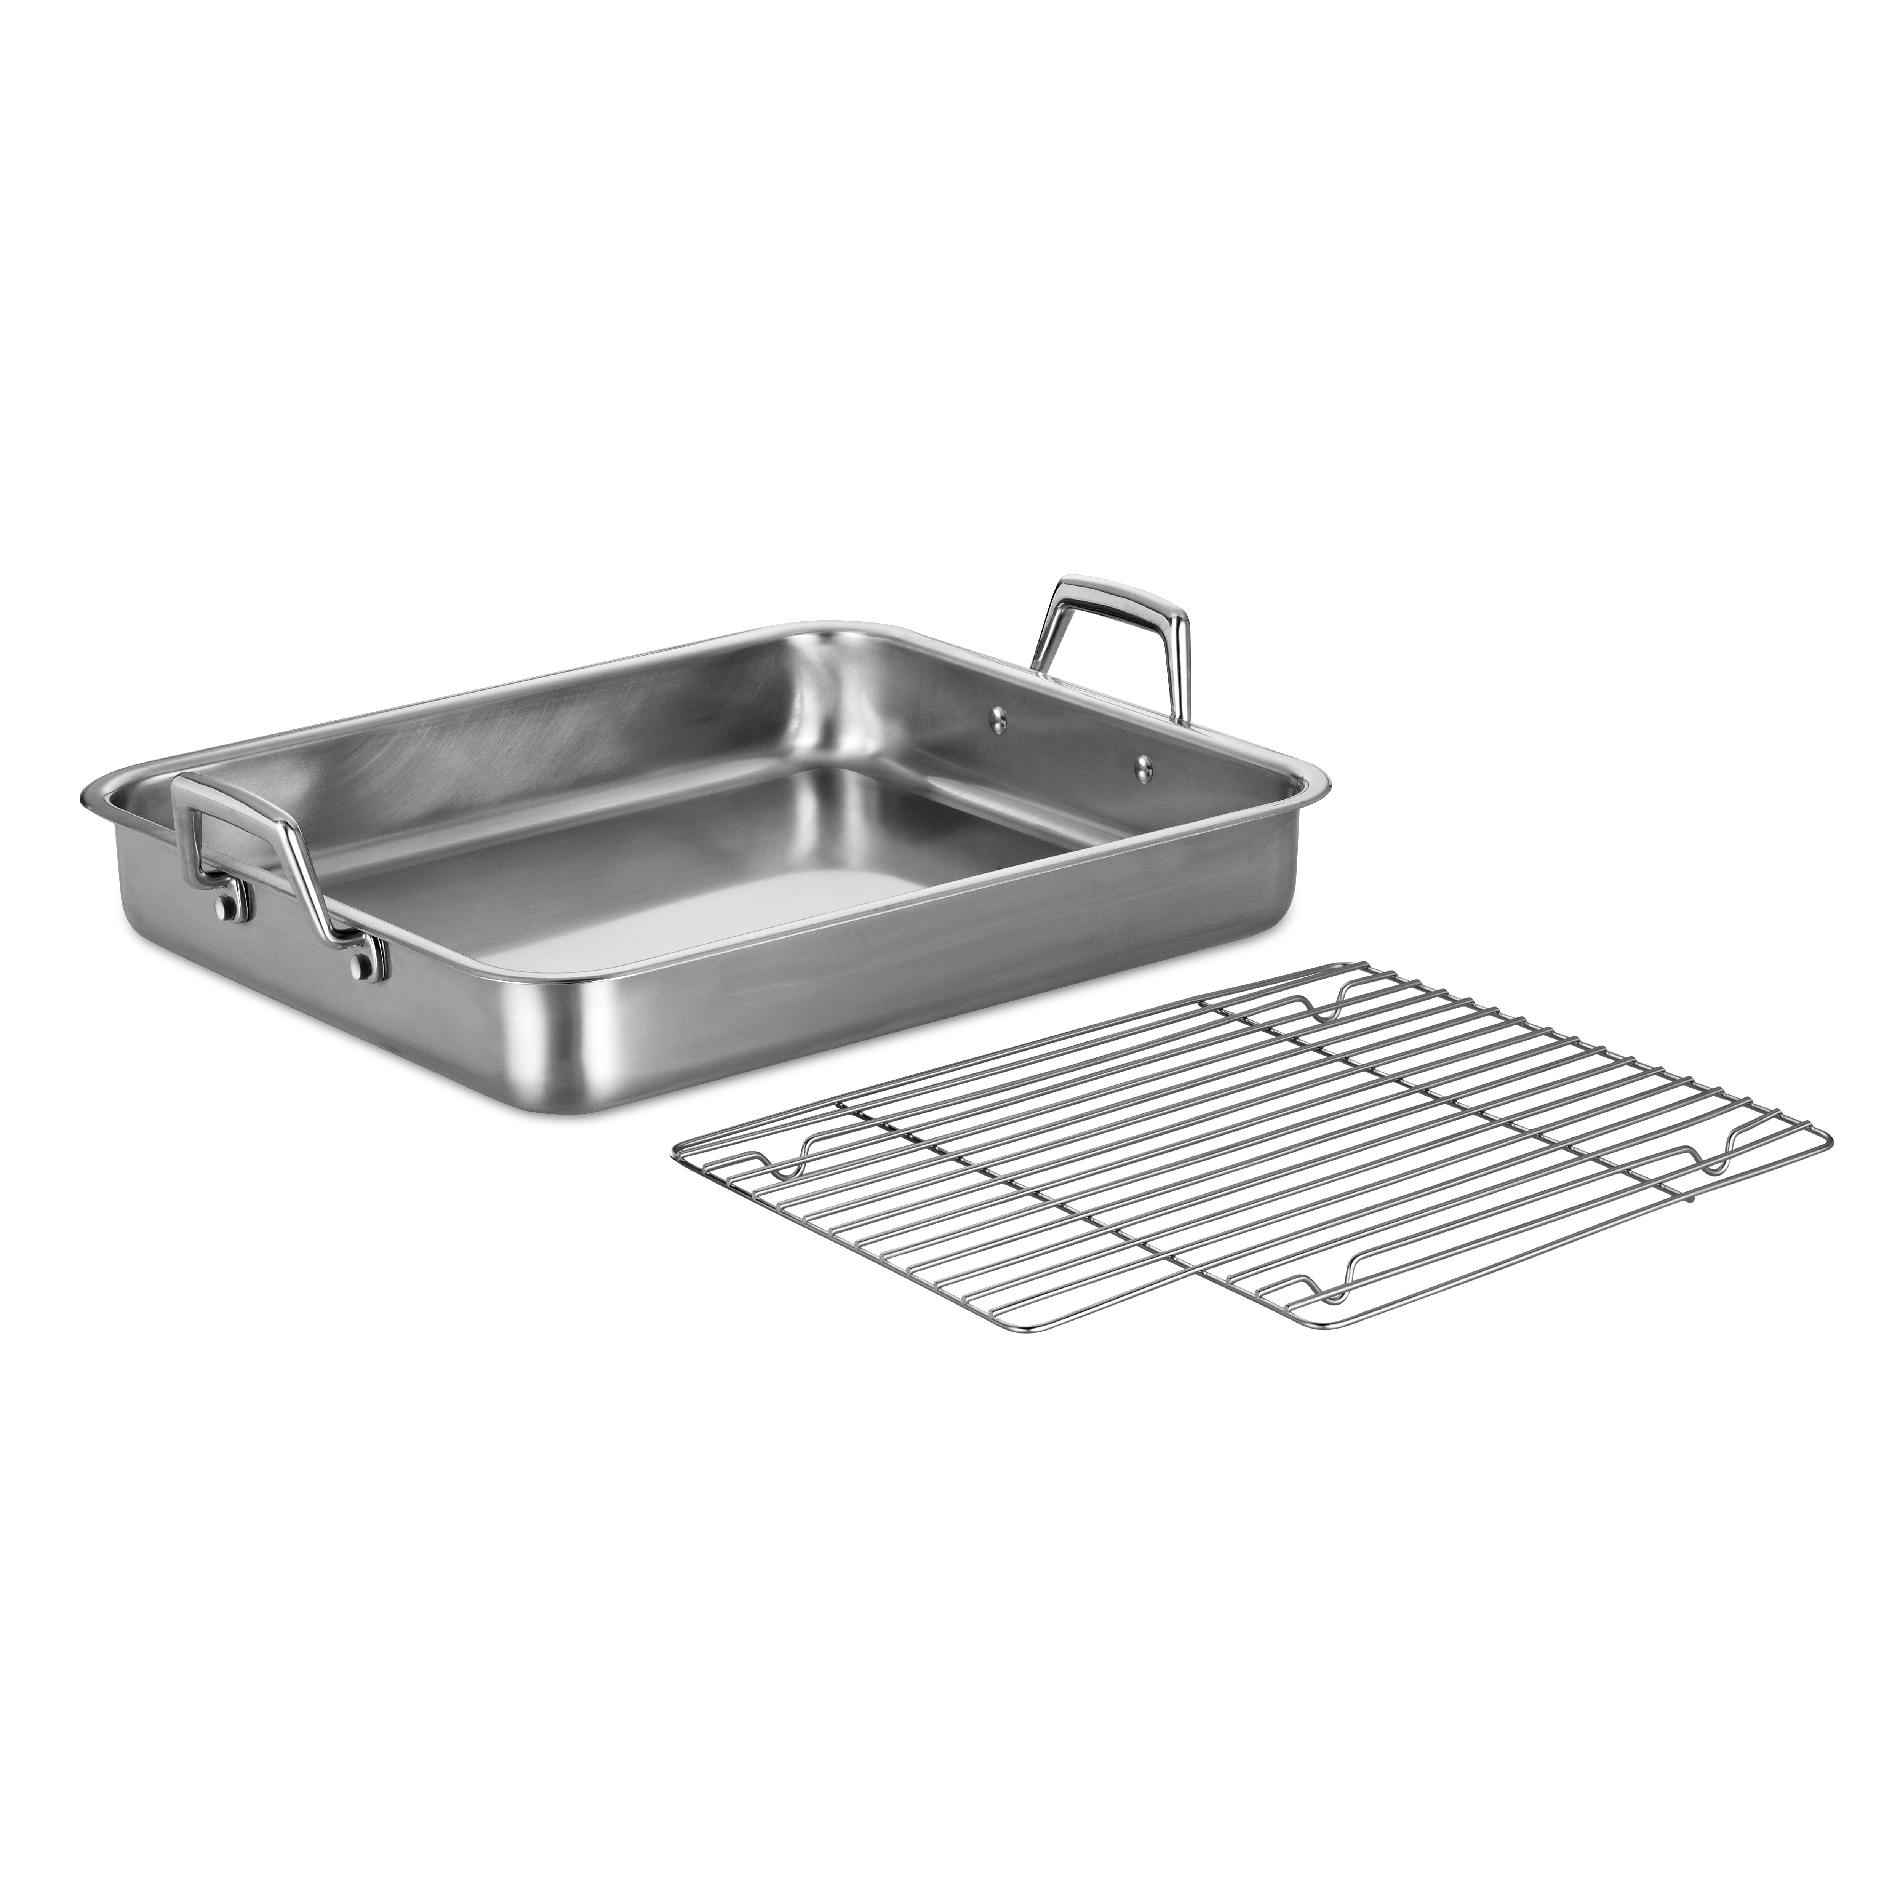 Gourmet Prima 18/10 Stainless Steel 16.5 in Roasting Pan - Includes Basting Grill